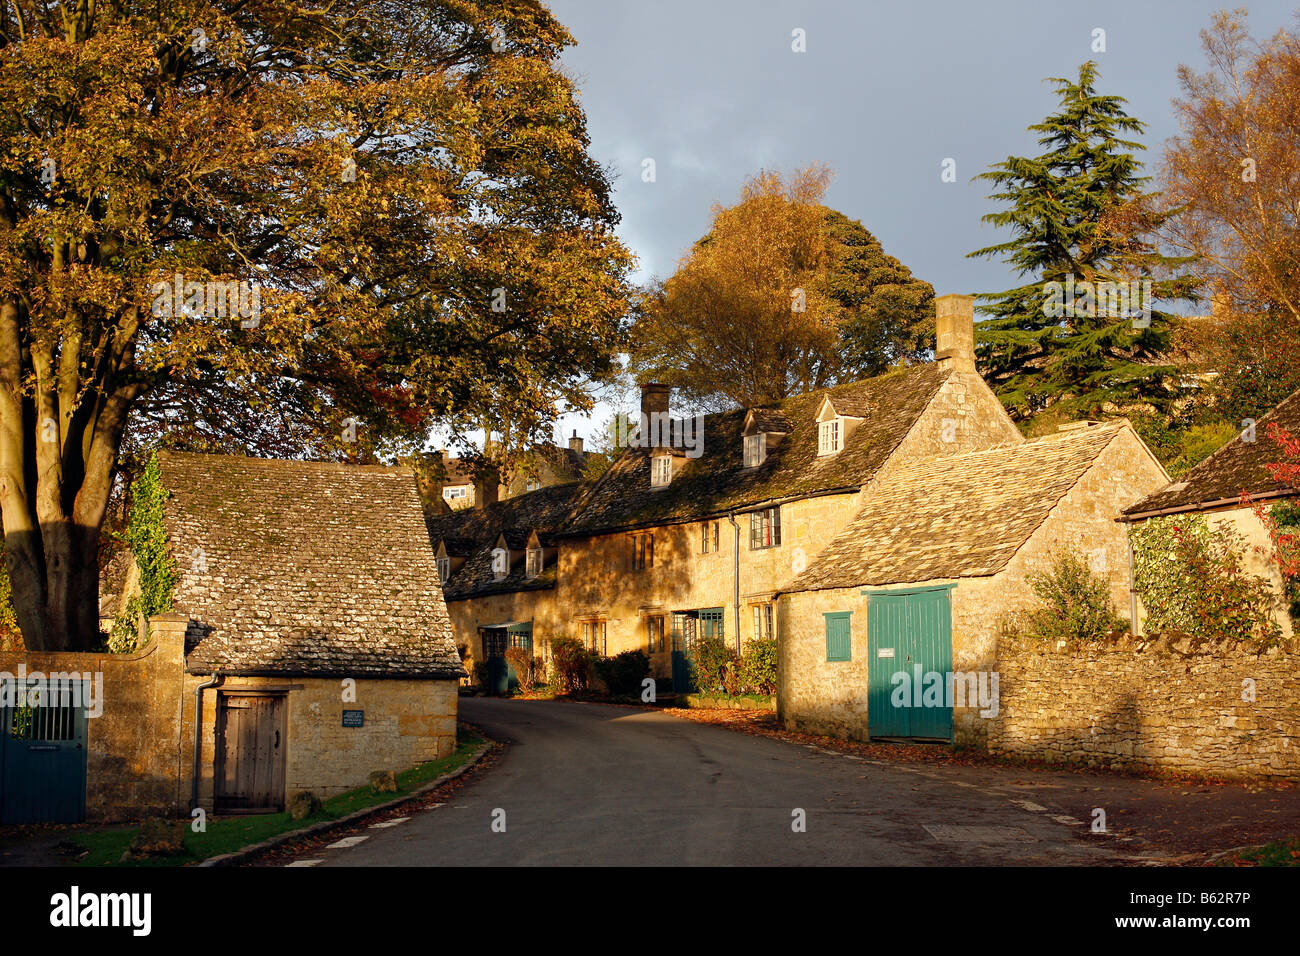 Village of Snowshill  in the cotswolds. Cottages made in Cotswold stone. Natural quarried stone used in house building Stock Photo